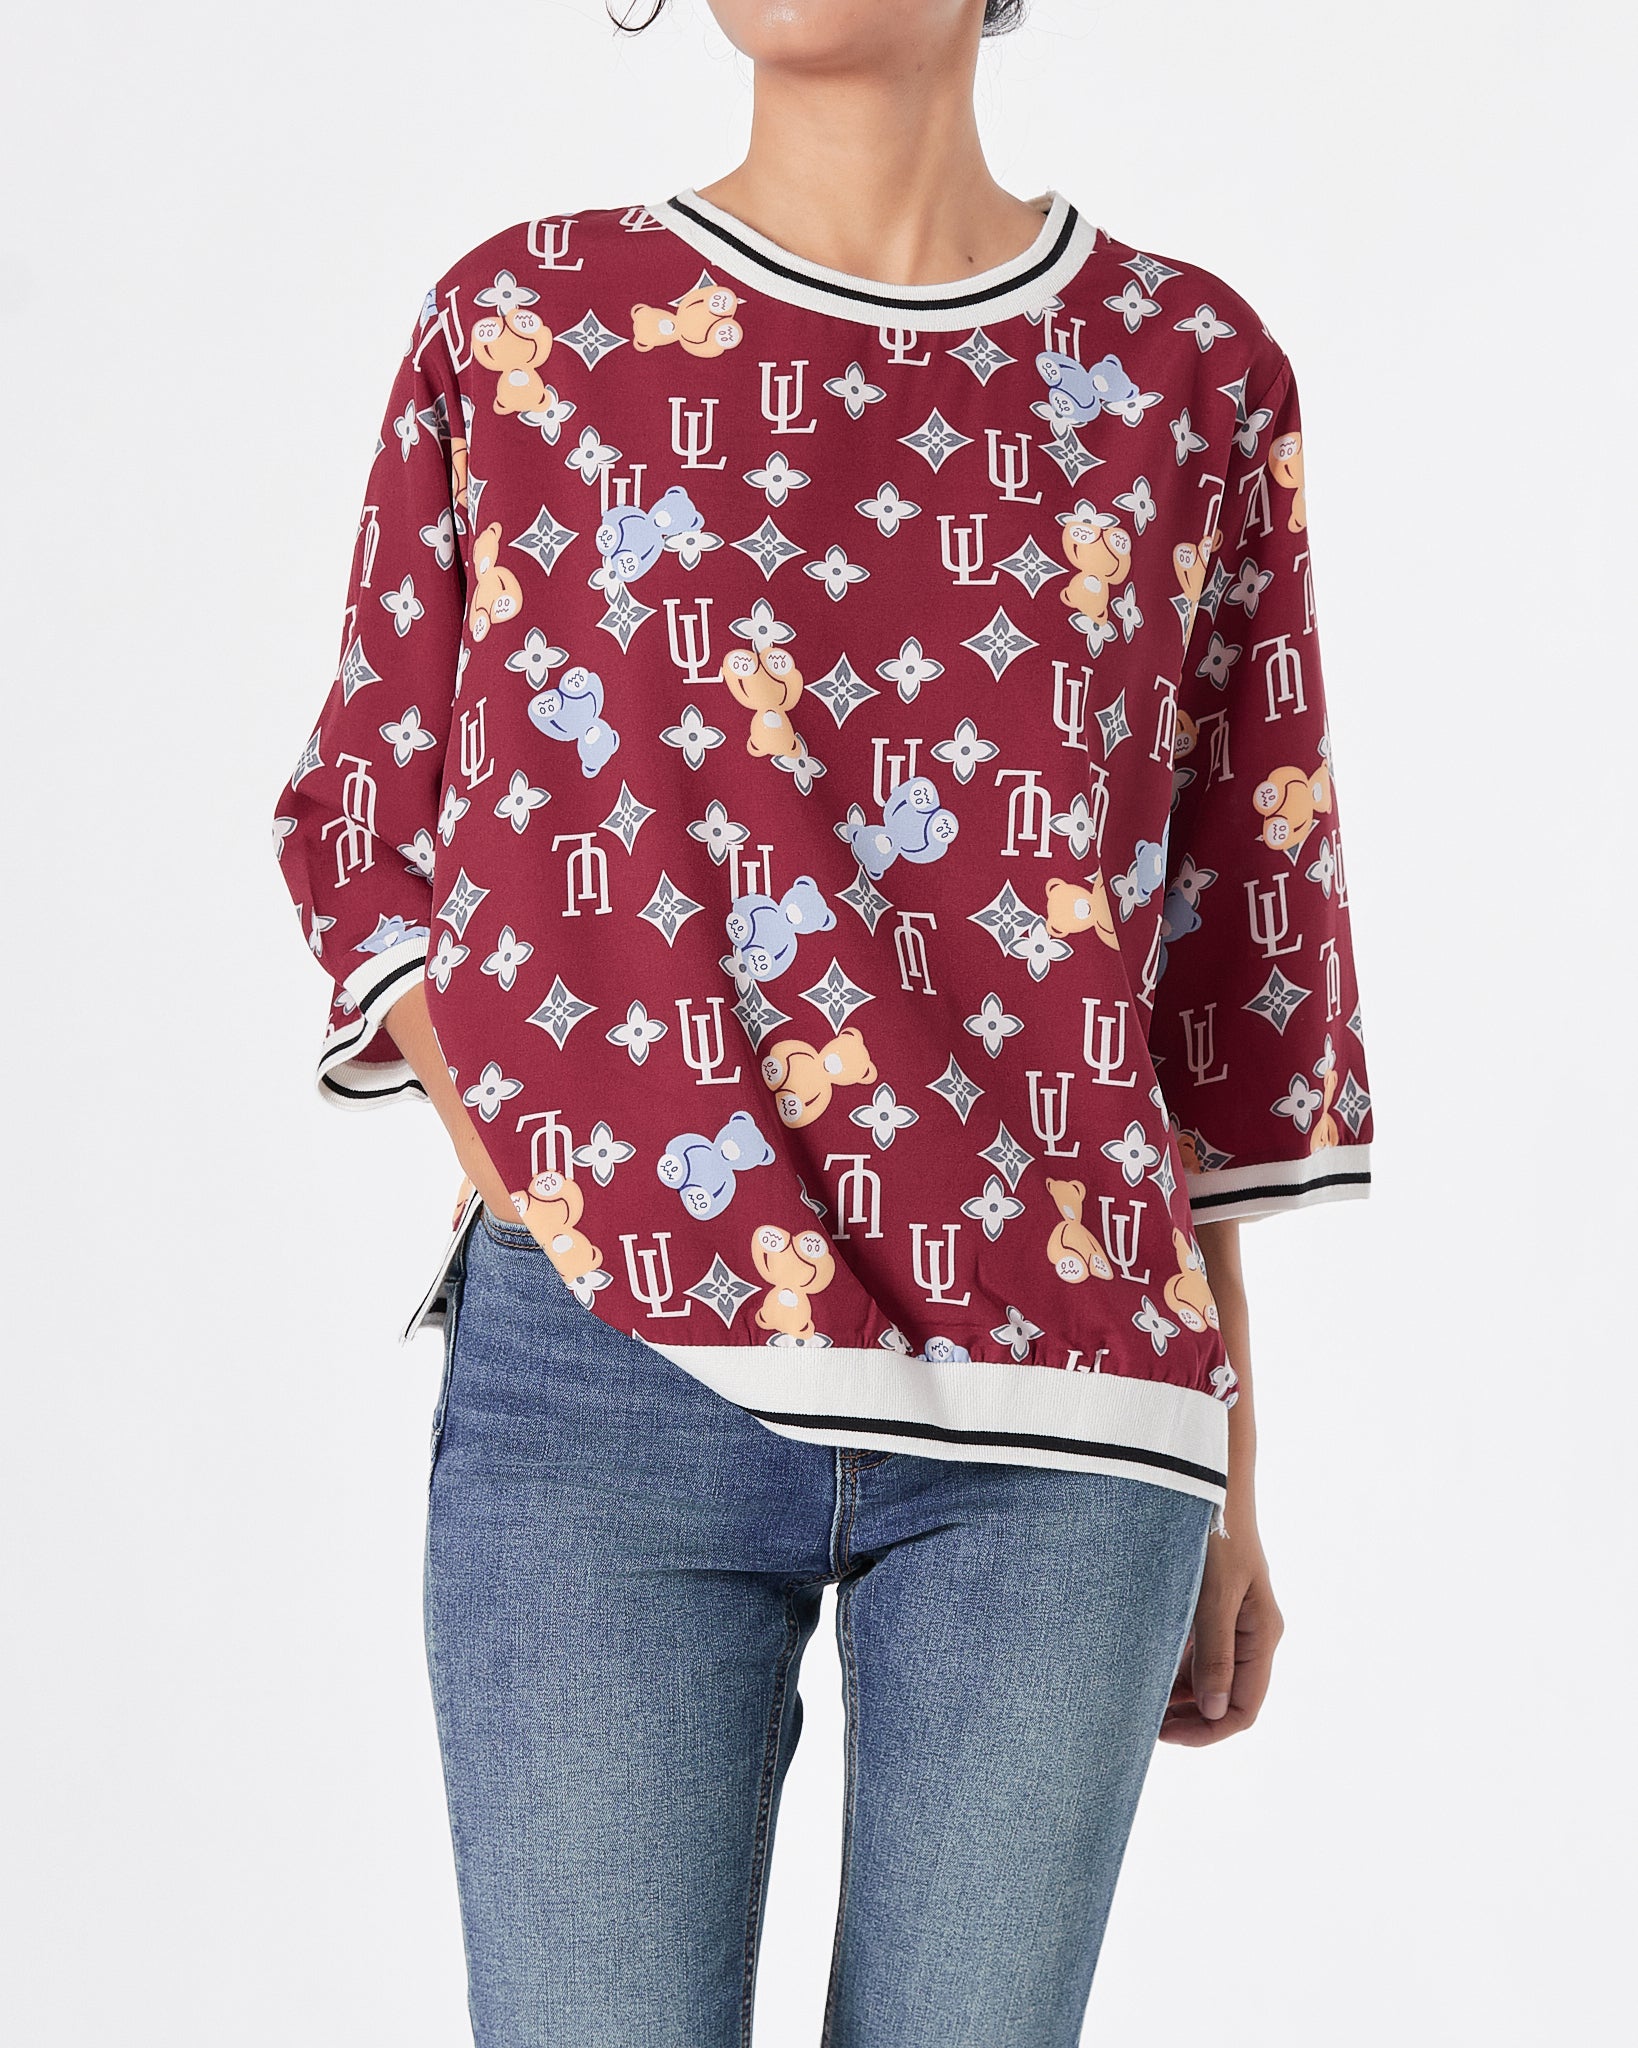 Monogram Over Printed Lady Red T-Shirt 15.90